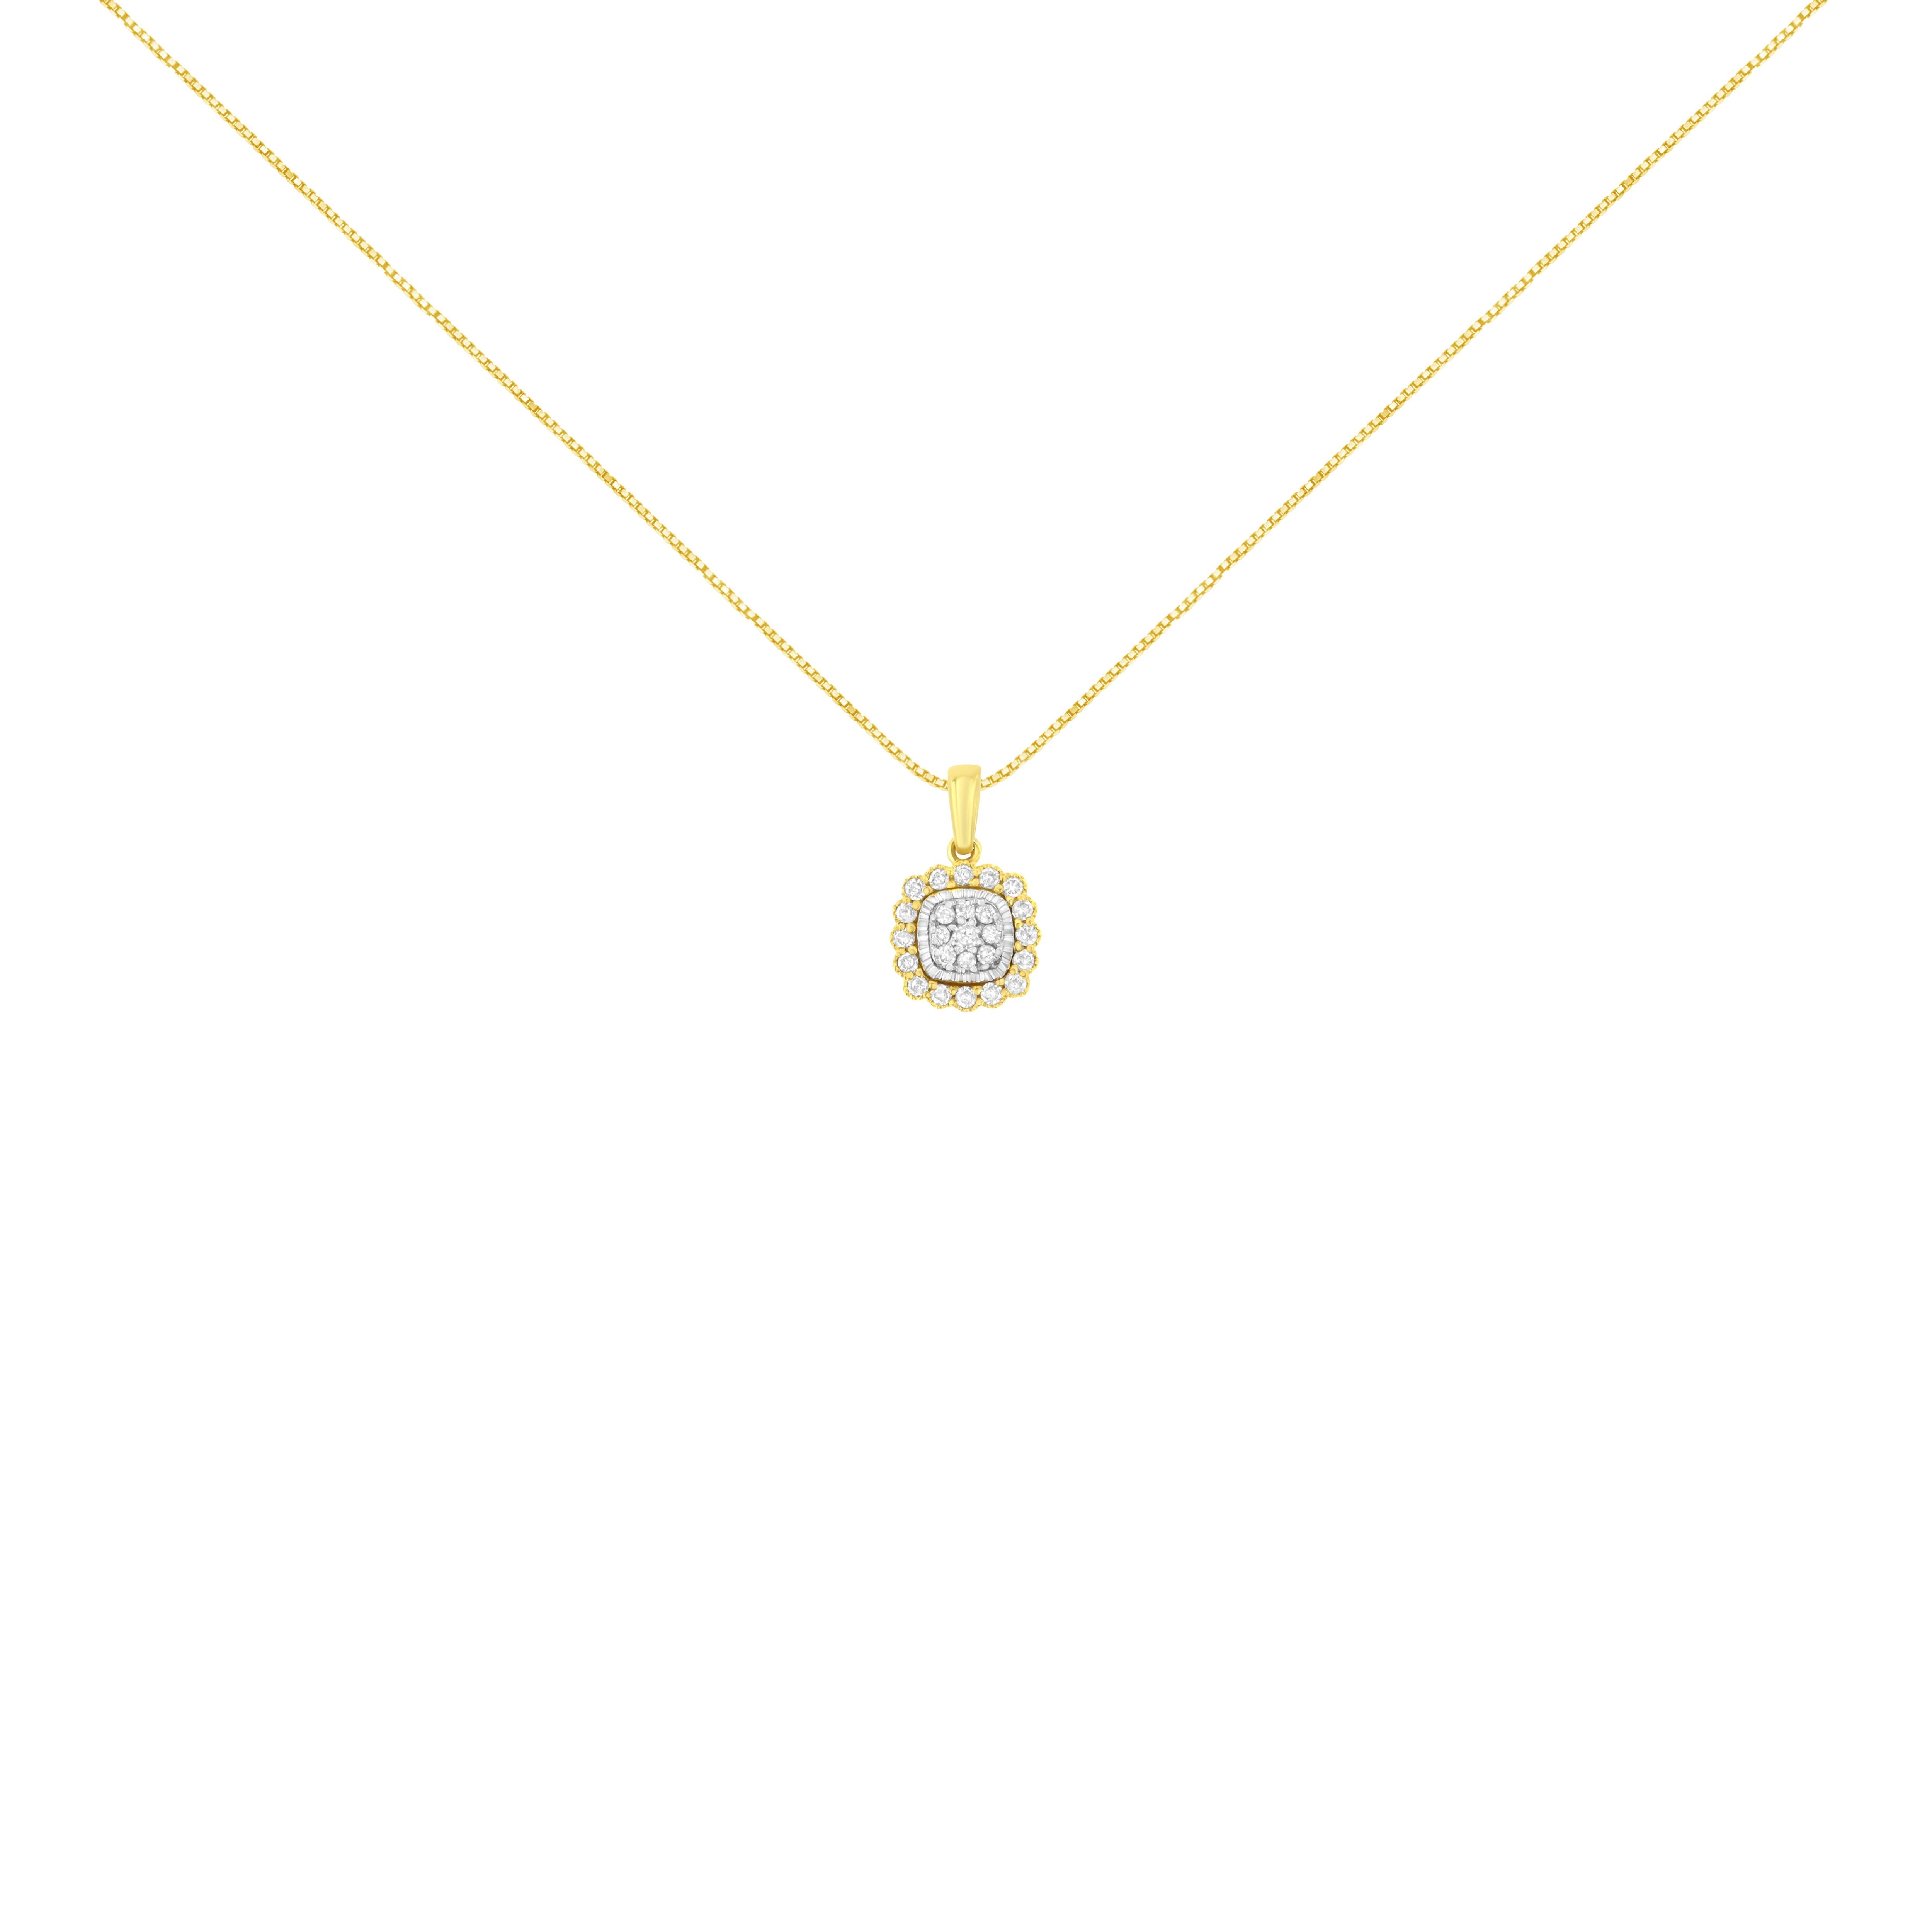 Minimalism is the latest fashion! Sparkle in the glory of stunning natural diamonds embedded in this .925 sterling silver necklace flash plated with 10K yellow gold. This 18